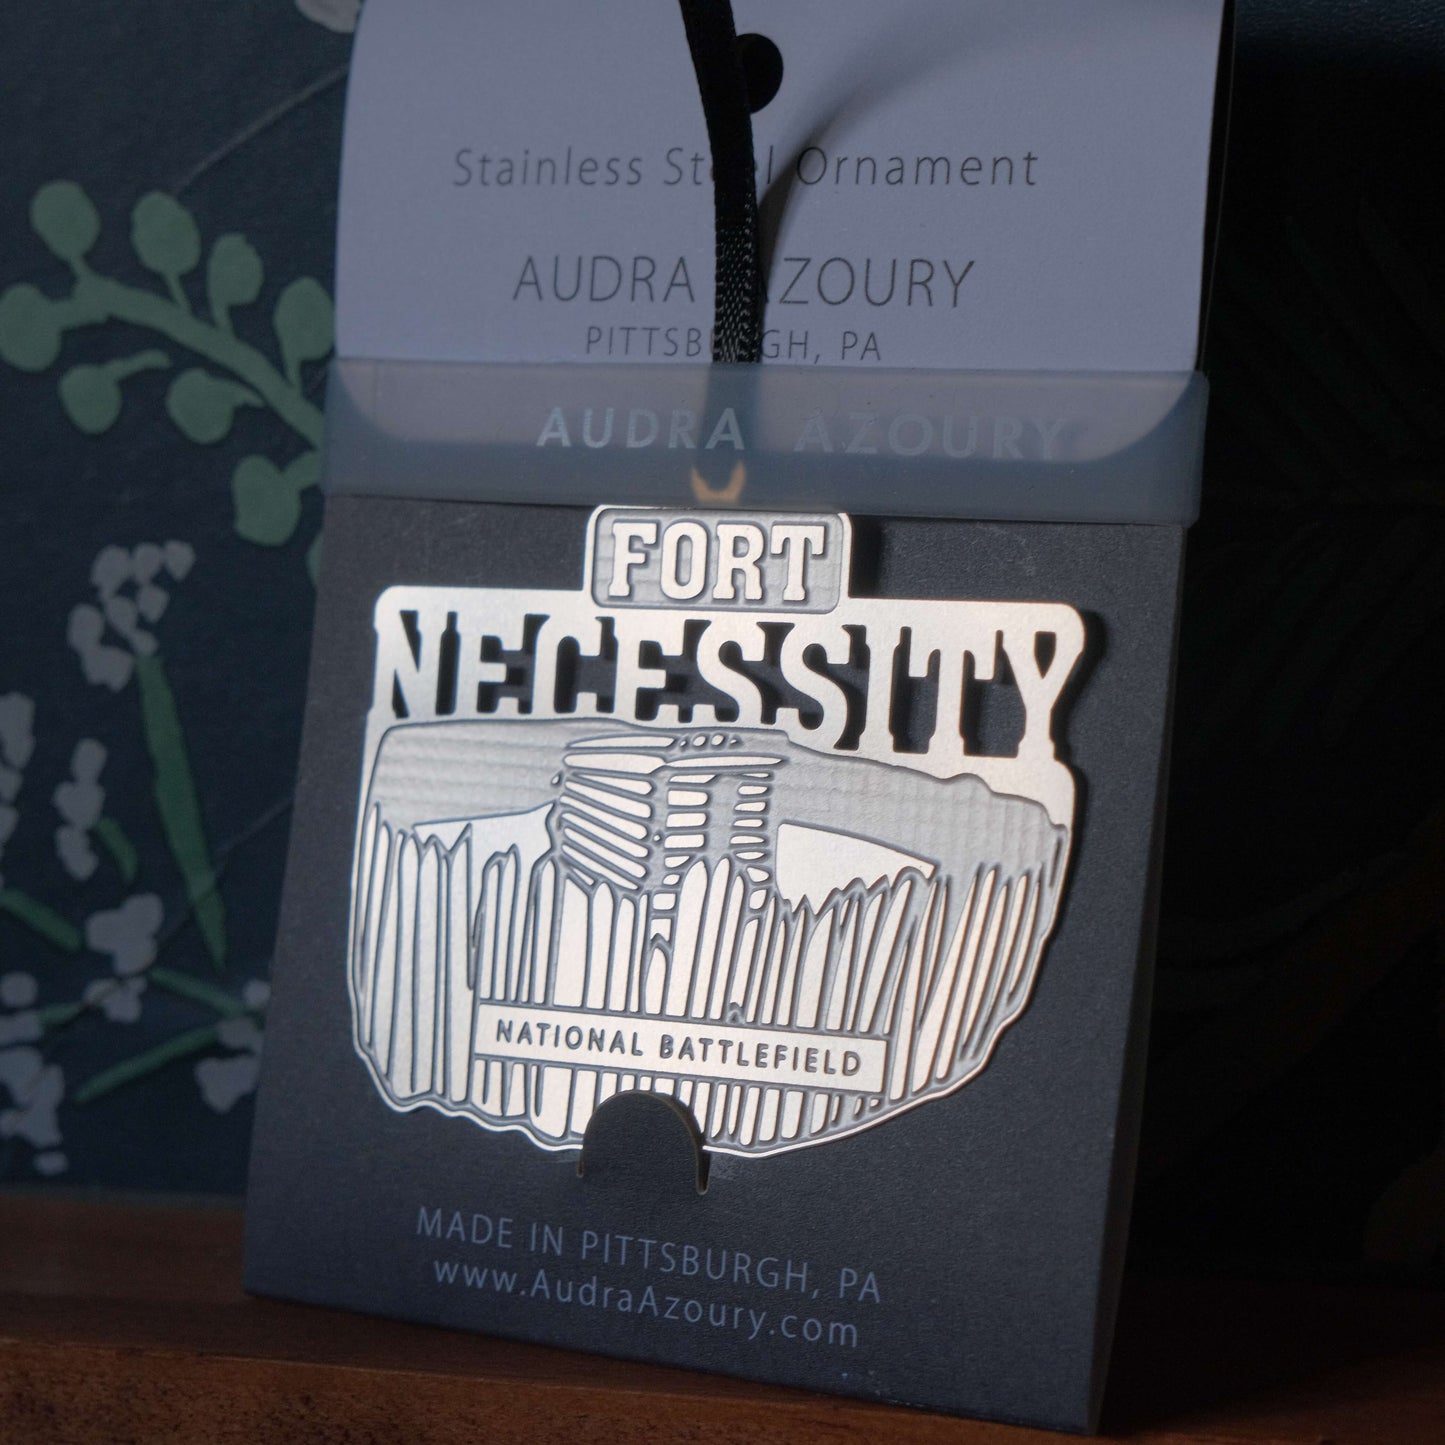 Fort Necessity National Battlefield Ornament by Audra Azoury